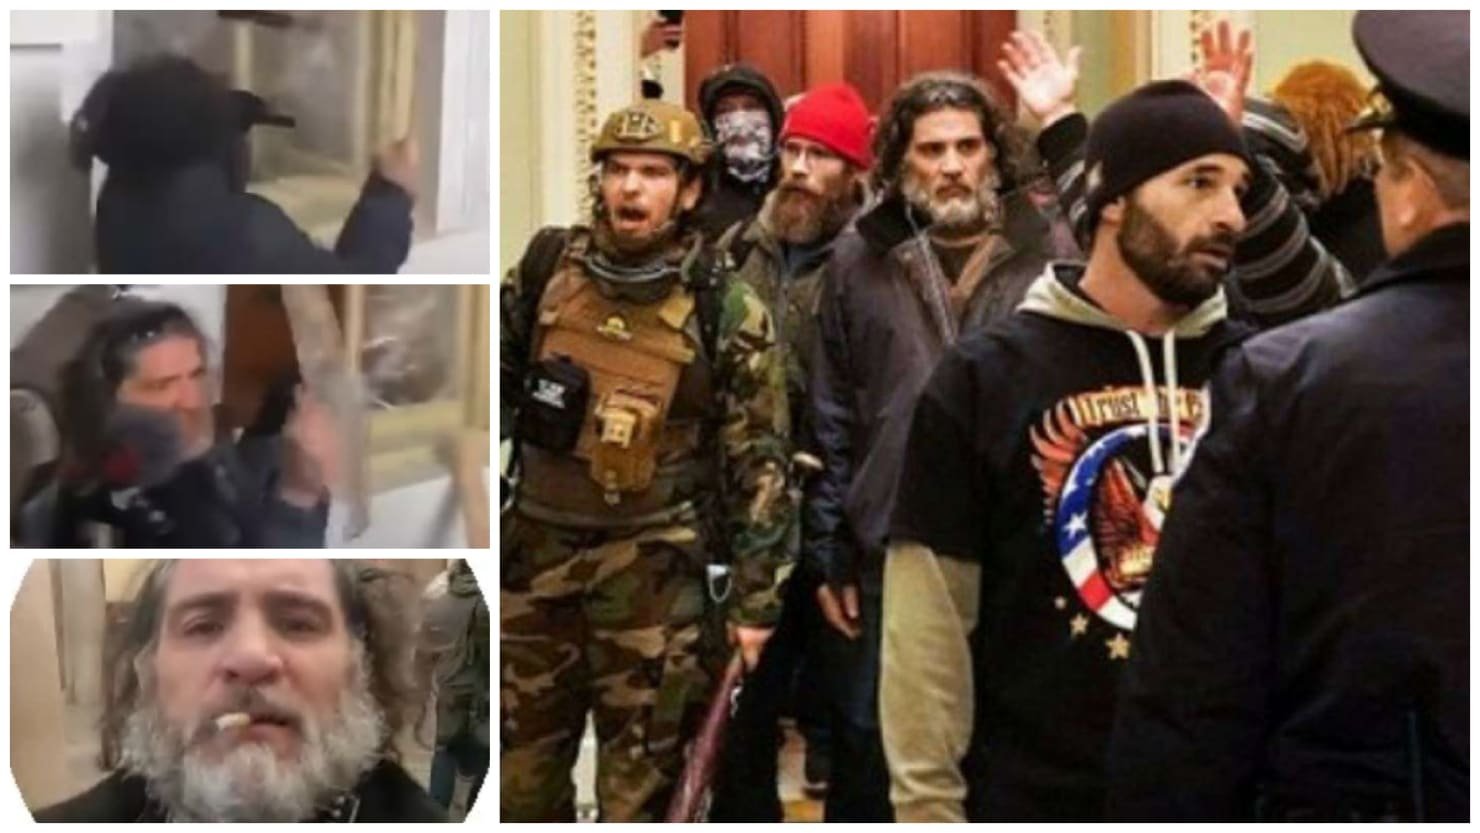 Feds Track Down Dominic ‘Spazzo’ Pezzola, the Proud Boy Seen Smashing Capitol Window With Police Shield